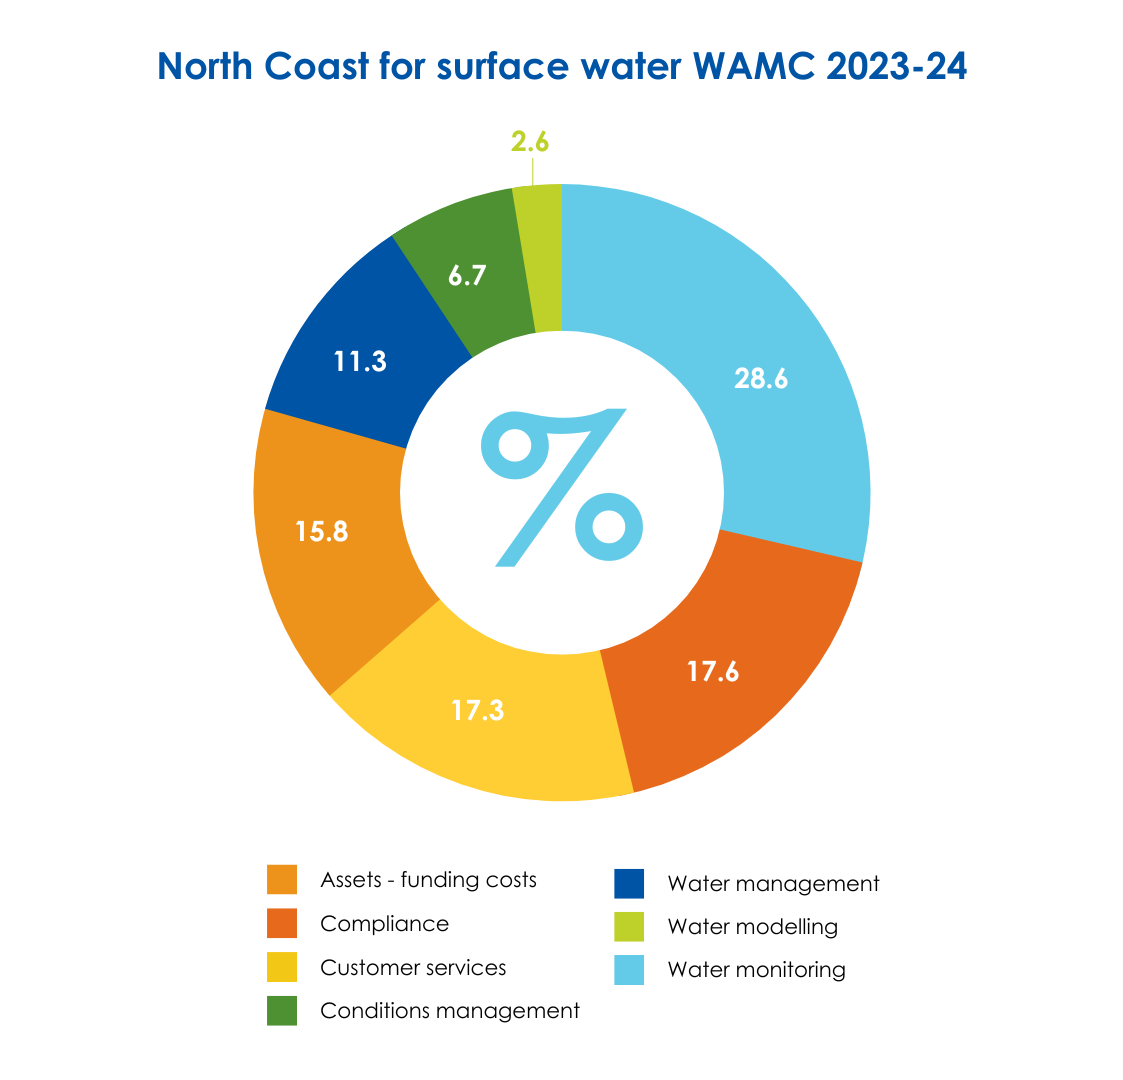 North Coast for surface water WAMC 2023-24